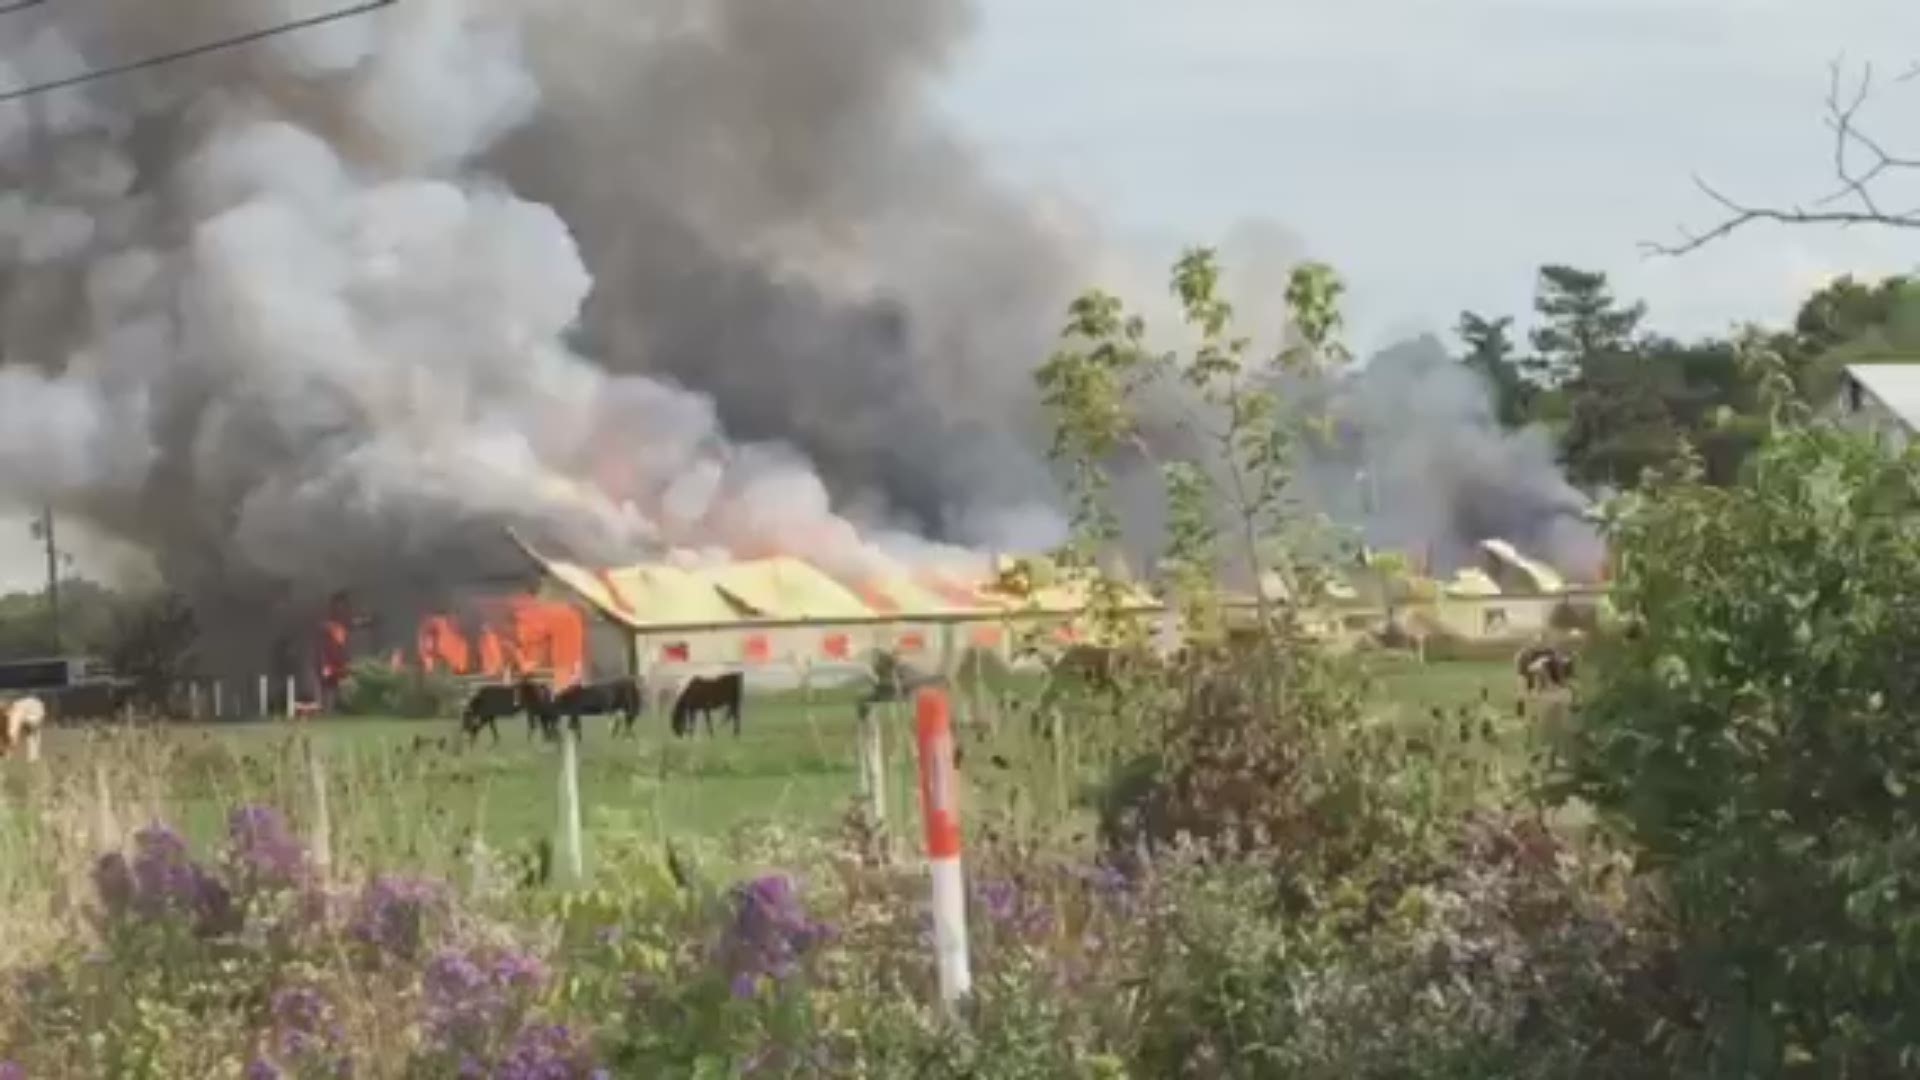 A large barn fire at Fantasy Acres in Perrysburg is being fought by multiple departments.